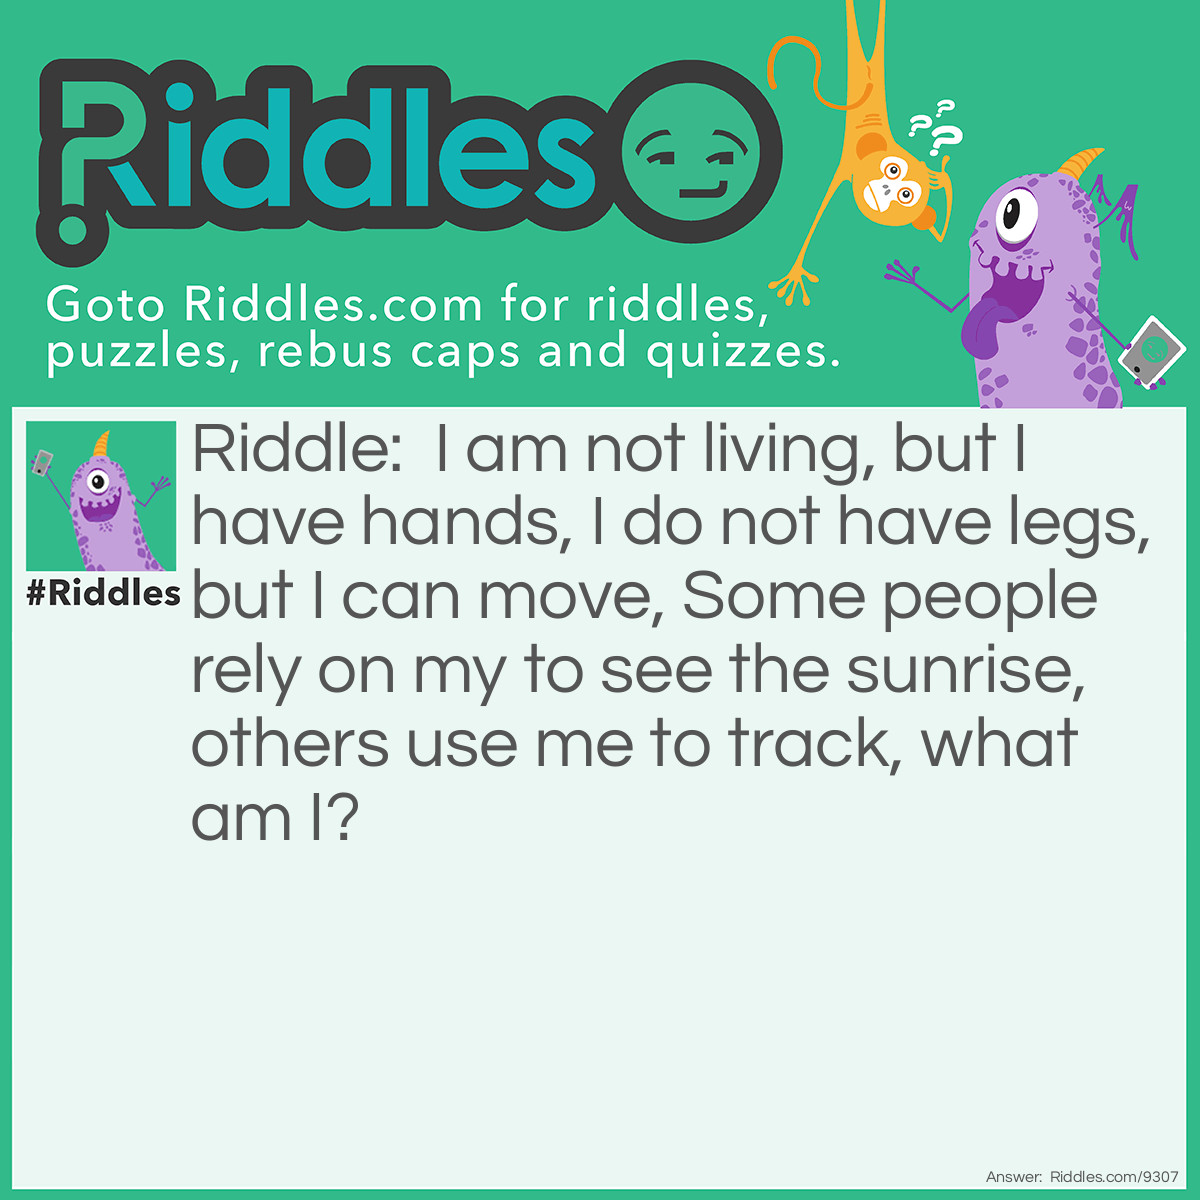 Riddle: I am not living, but I have hands, I do not have legs, but I can move, Some people rely on my to see the sunrise, others use me to track, what am I? Answer: Clock: Clocks dont live, but they have an hour and minute hand,, they don't have legs, but they can mechanically move, people have a clock on their alarm to get up on time to see the sunrise, and others use clocks to track time.